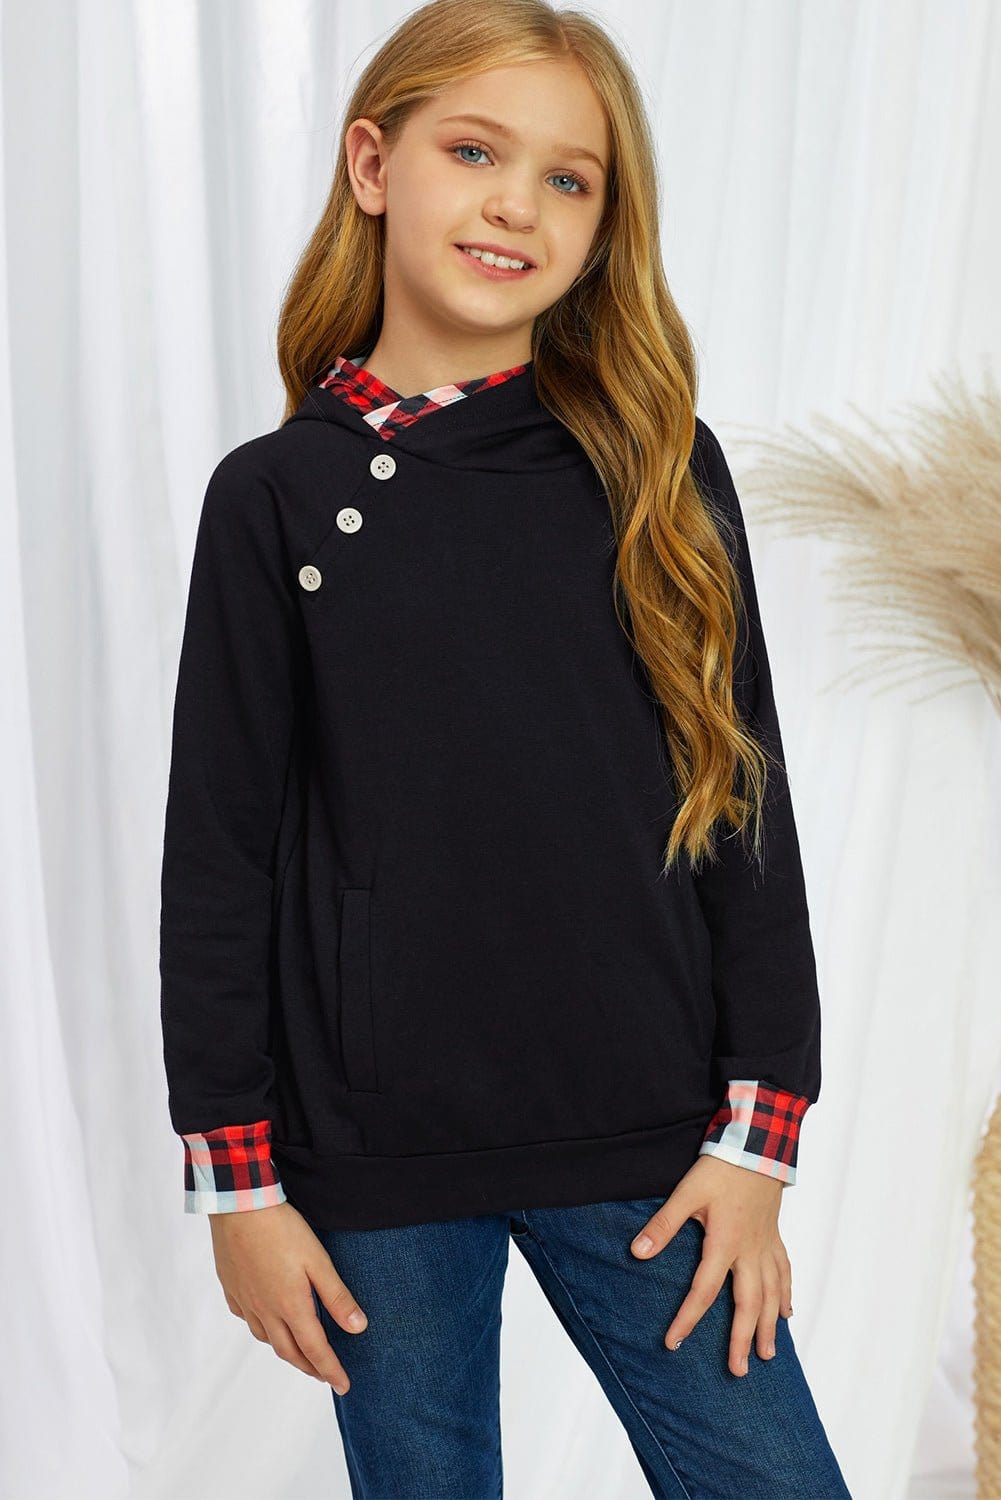 Girls Plaid Decorative Button Hoodie with Pockets - CLASSY CLOSET BOUTIQUEGirls Plaid Decorative Button Hoodie with Pocketschildren100100464388865100100464388865Black4Y-5Y